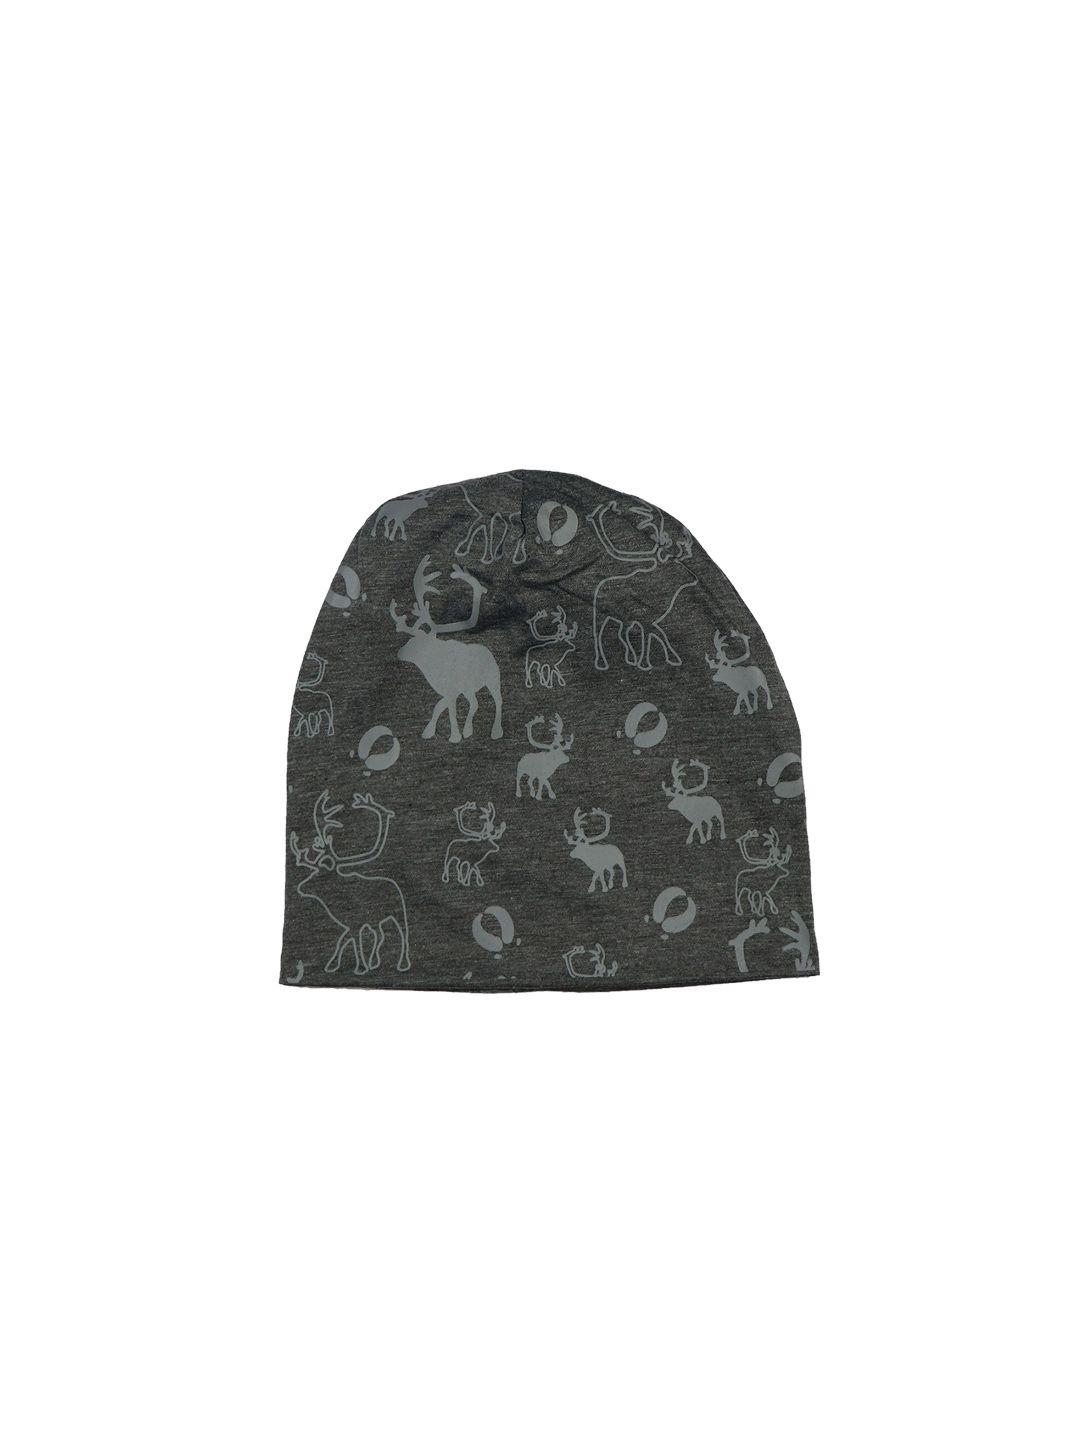 isweven unisex grey printed beanie